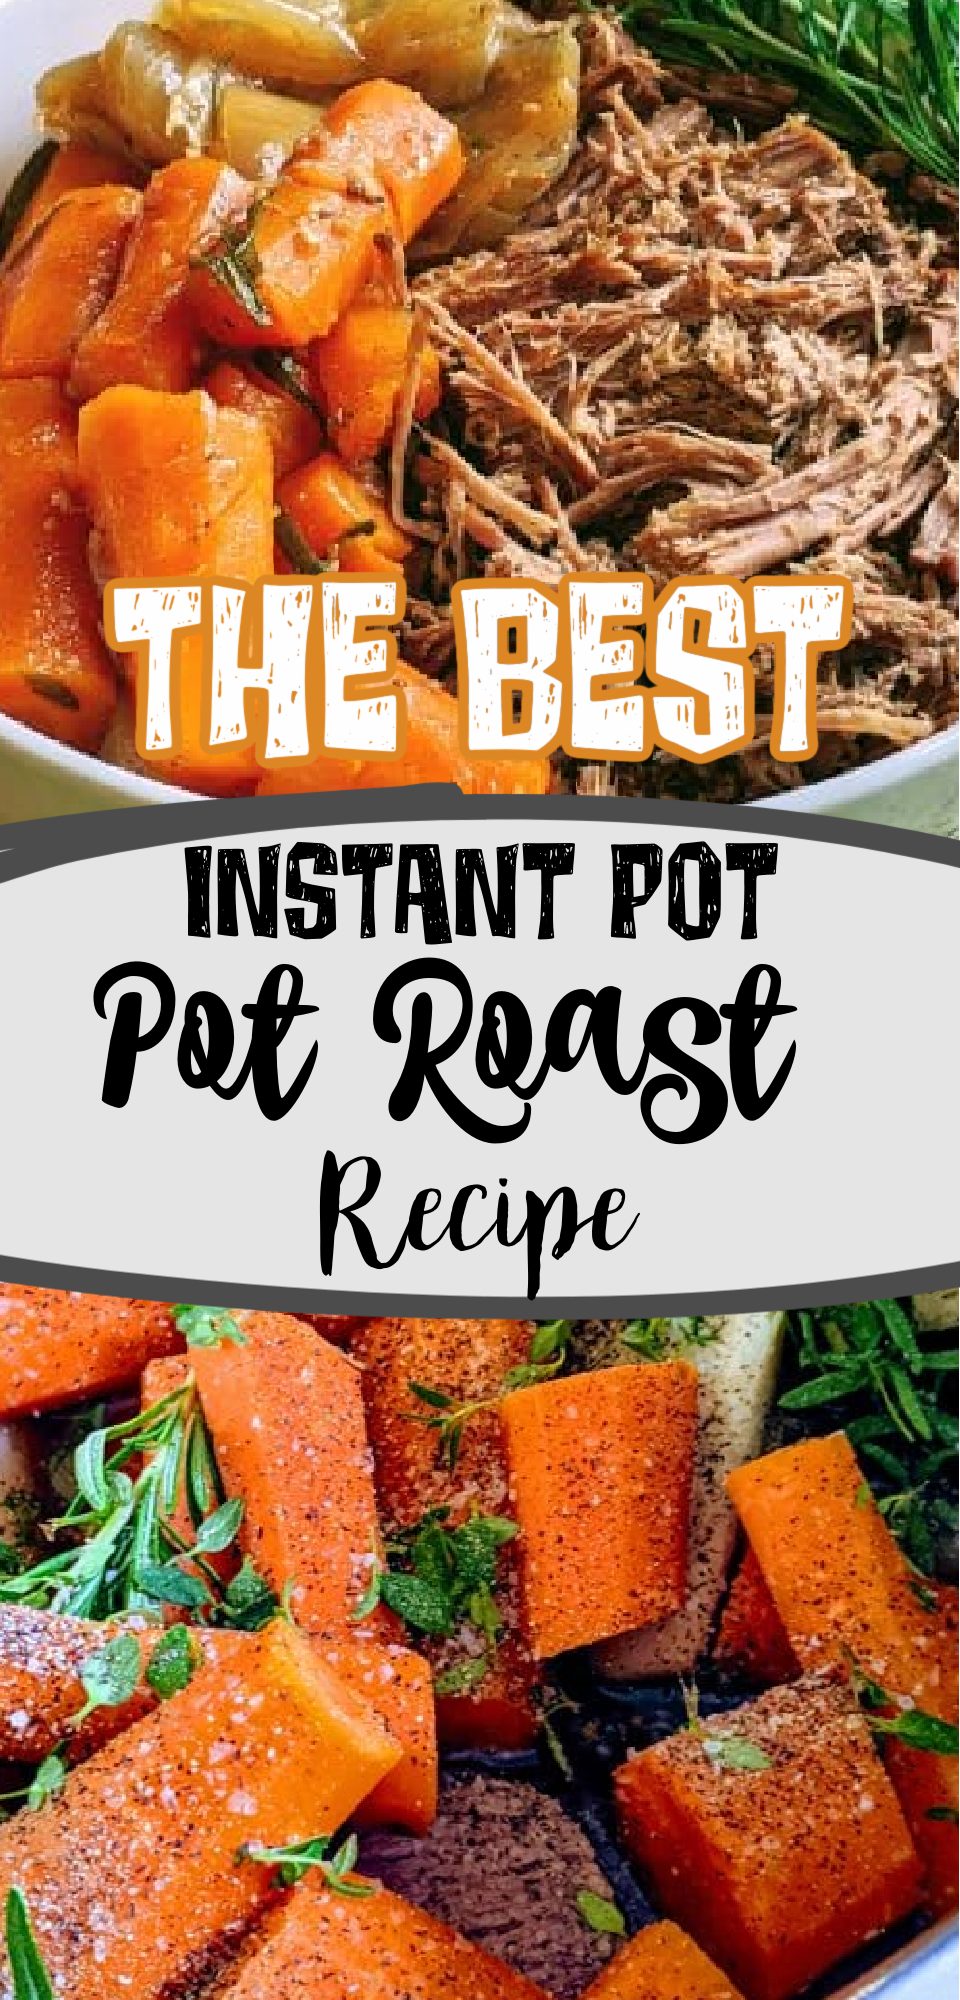 There's nothing that says Sunday dinner better than a pot roast with gravy and potatoes. Instant Pot roast beef is the easiest method for making a pot roast, and this recipe is tried and true - including a fantastic gravy recipe.